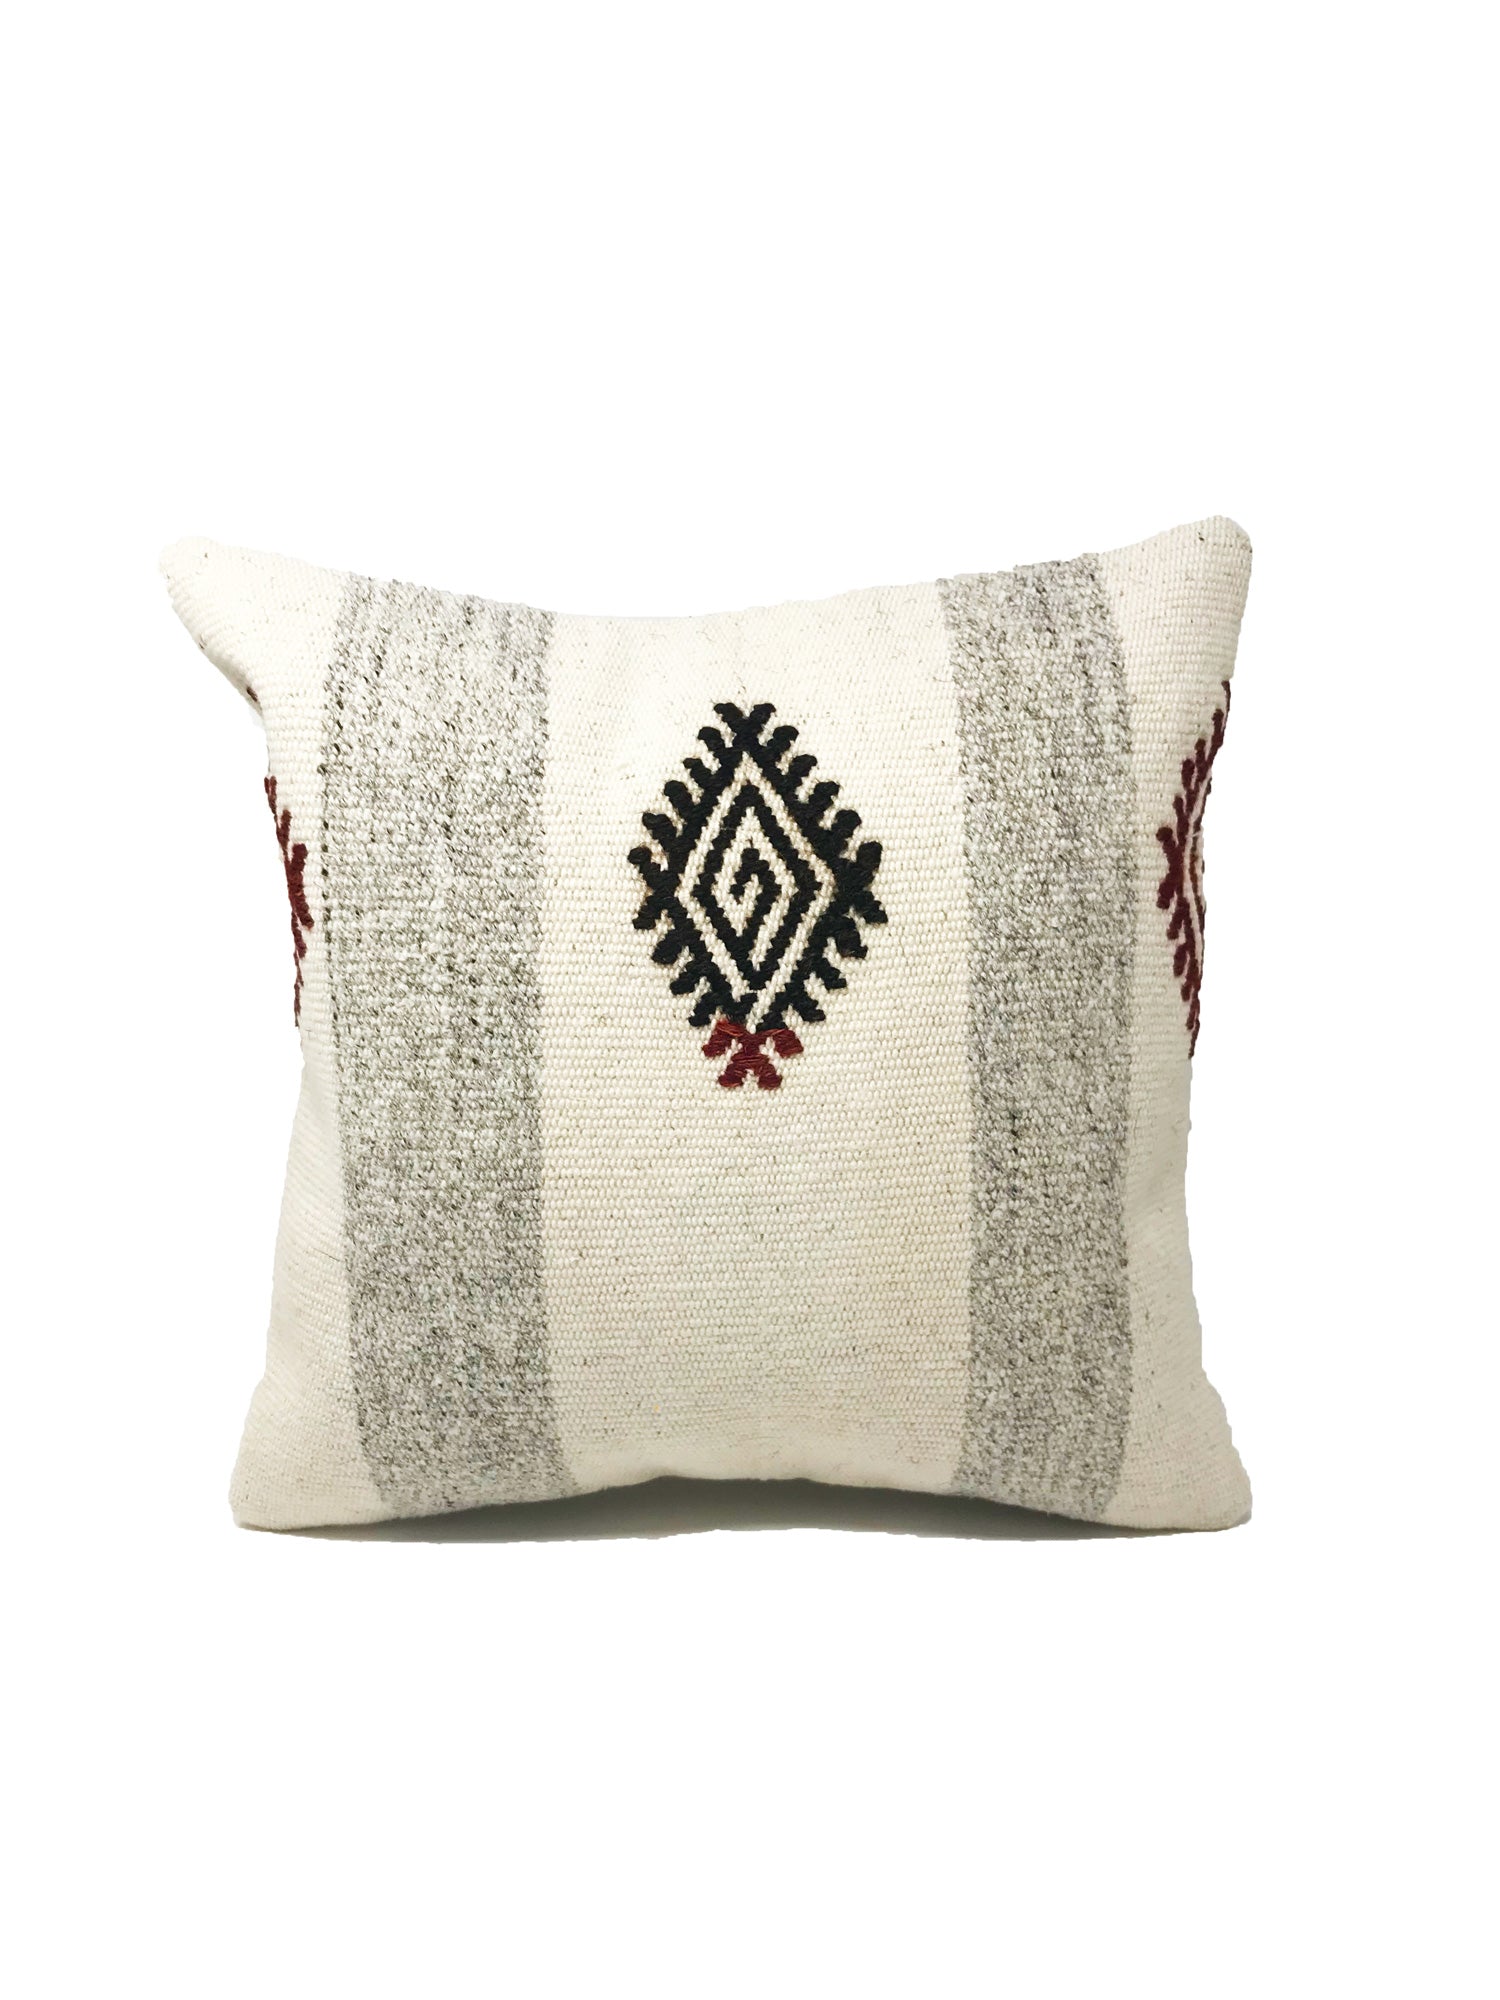 Cuckoo B Bruna pillow cover. Handmae out of vintage Kilim rugs, unique. Product made in Istambul, Turkey